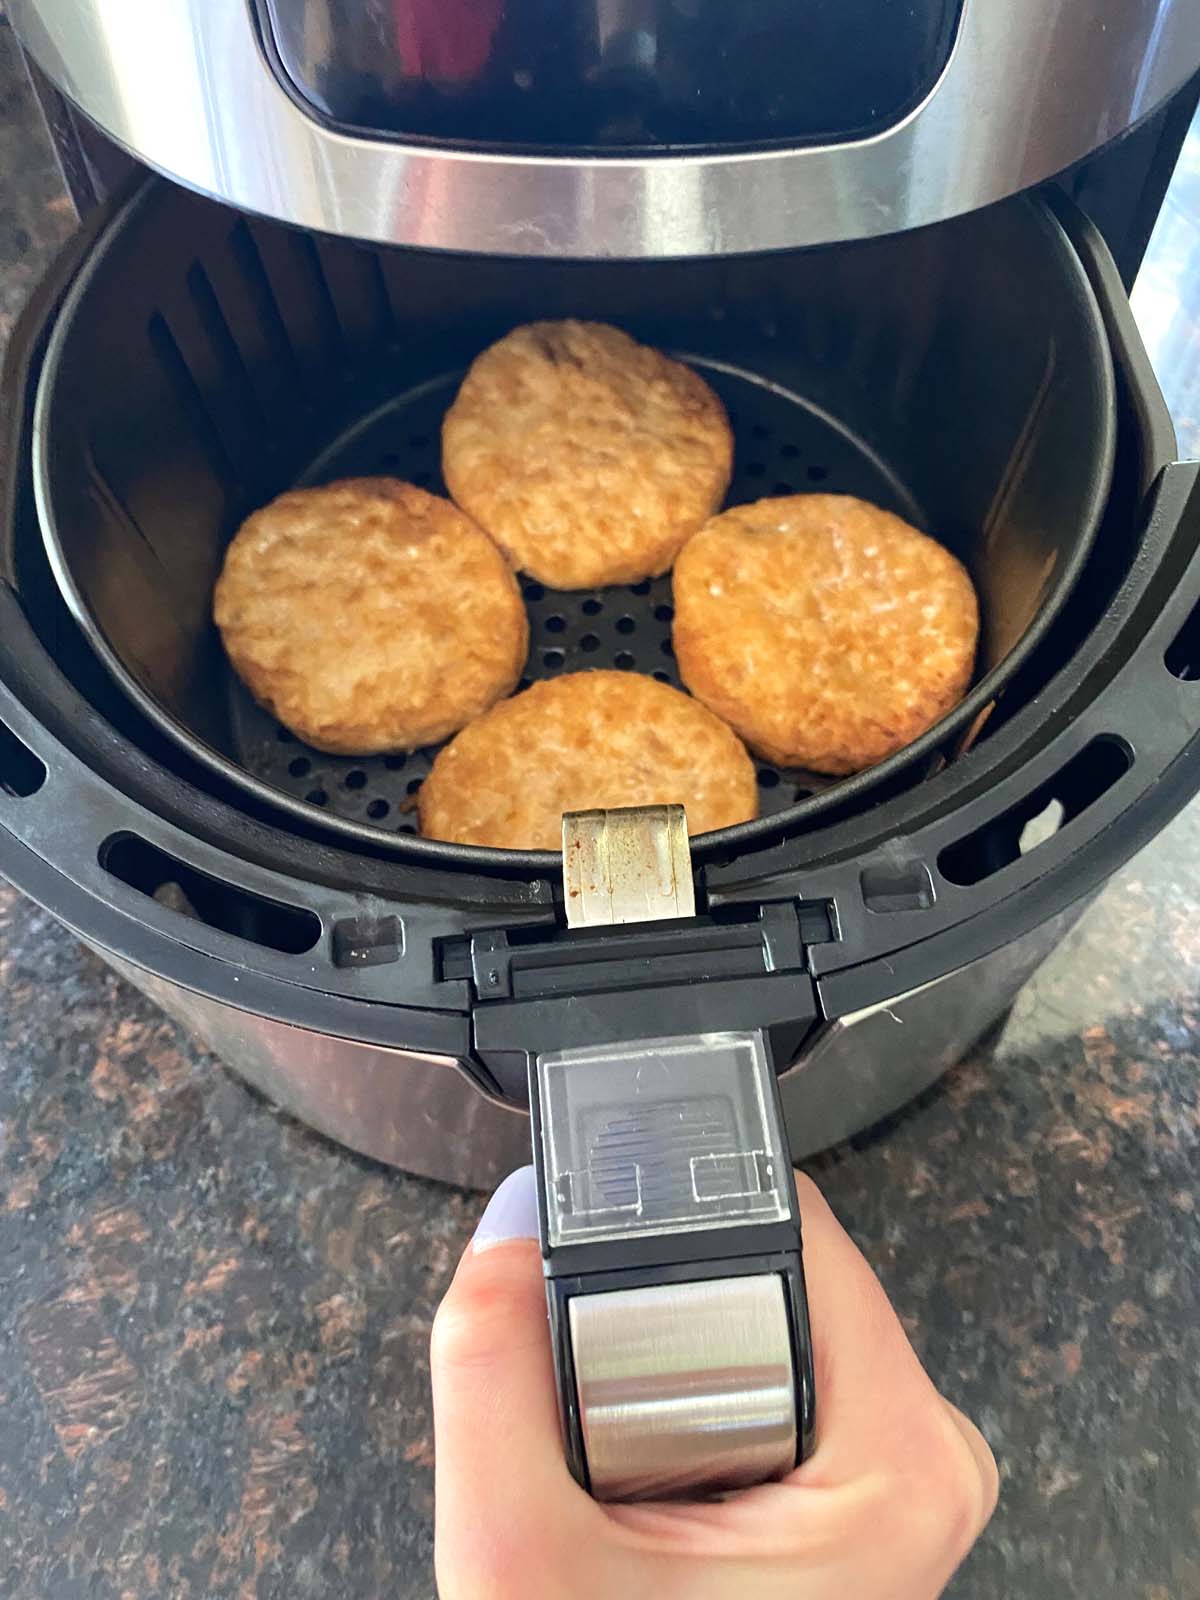 Cooked salmon burgers in the air fryer.